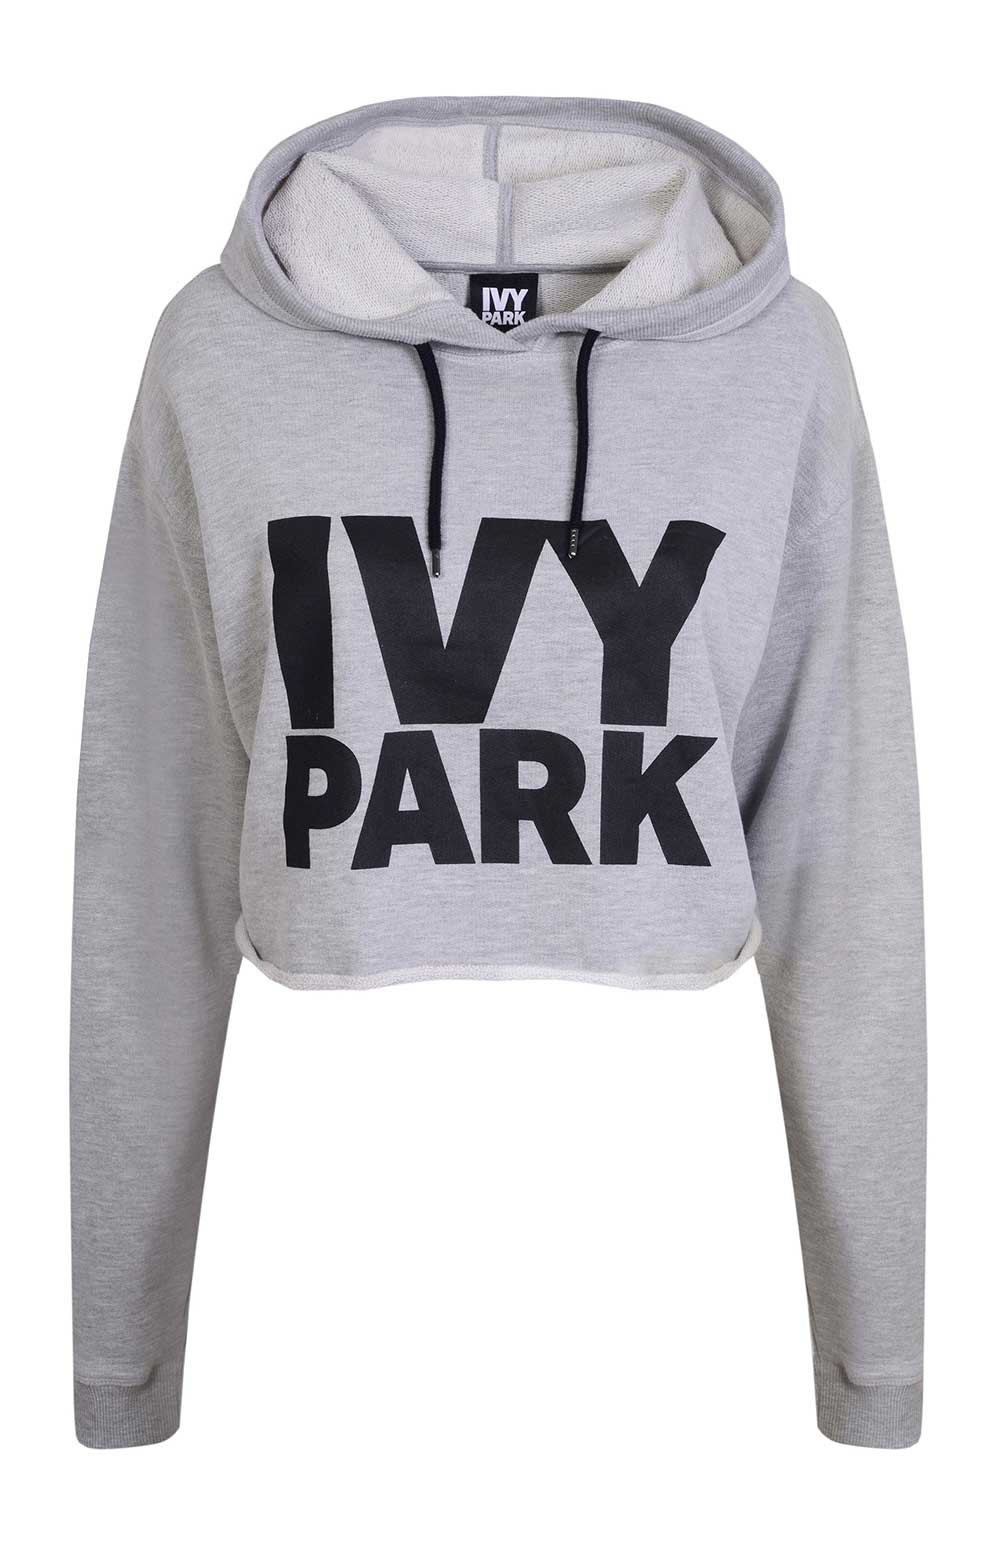 Cropped Logo Detailed Hoodie by Ivy Park, $80 from Topshop